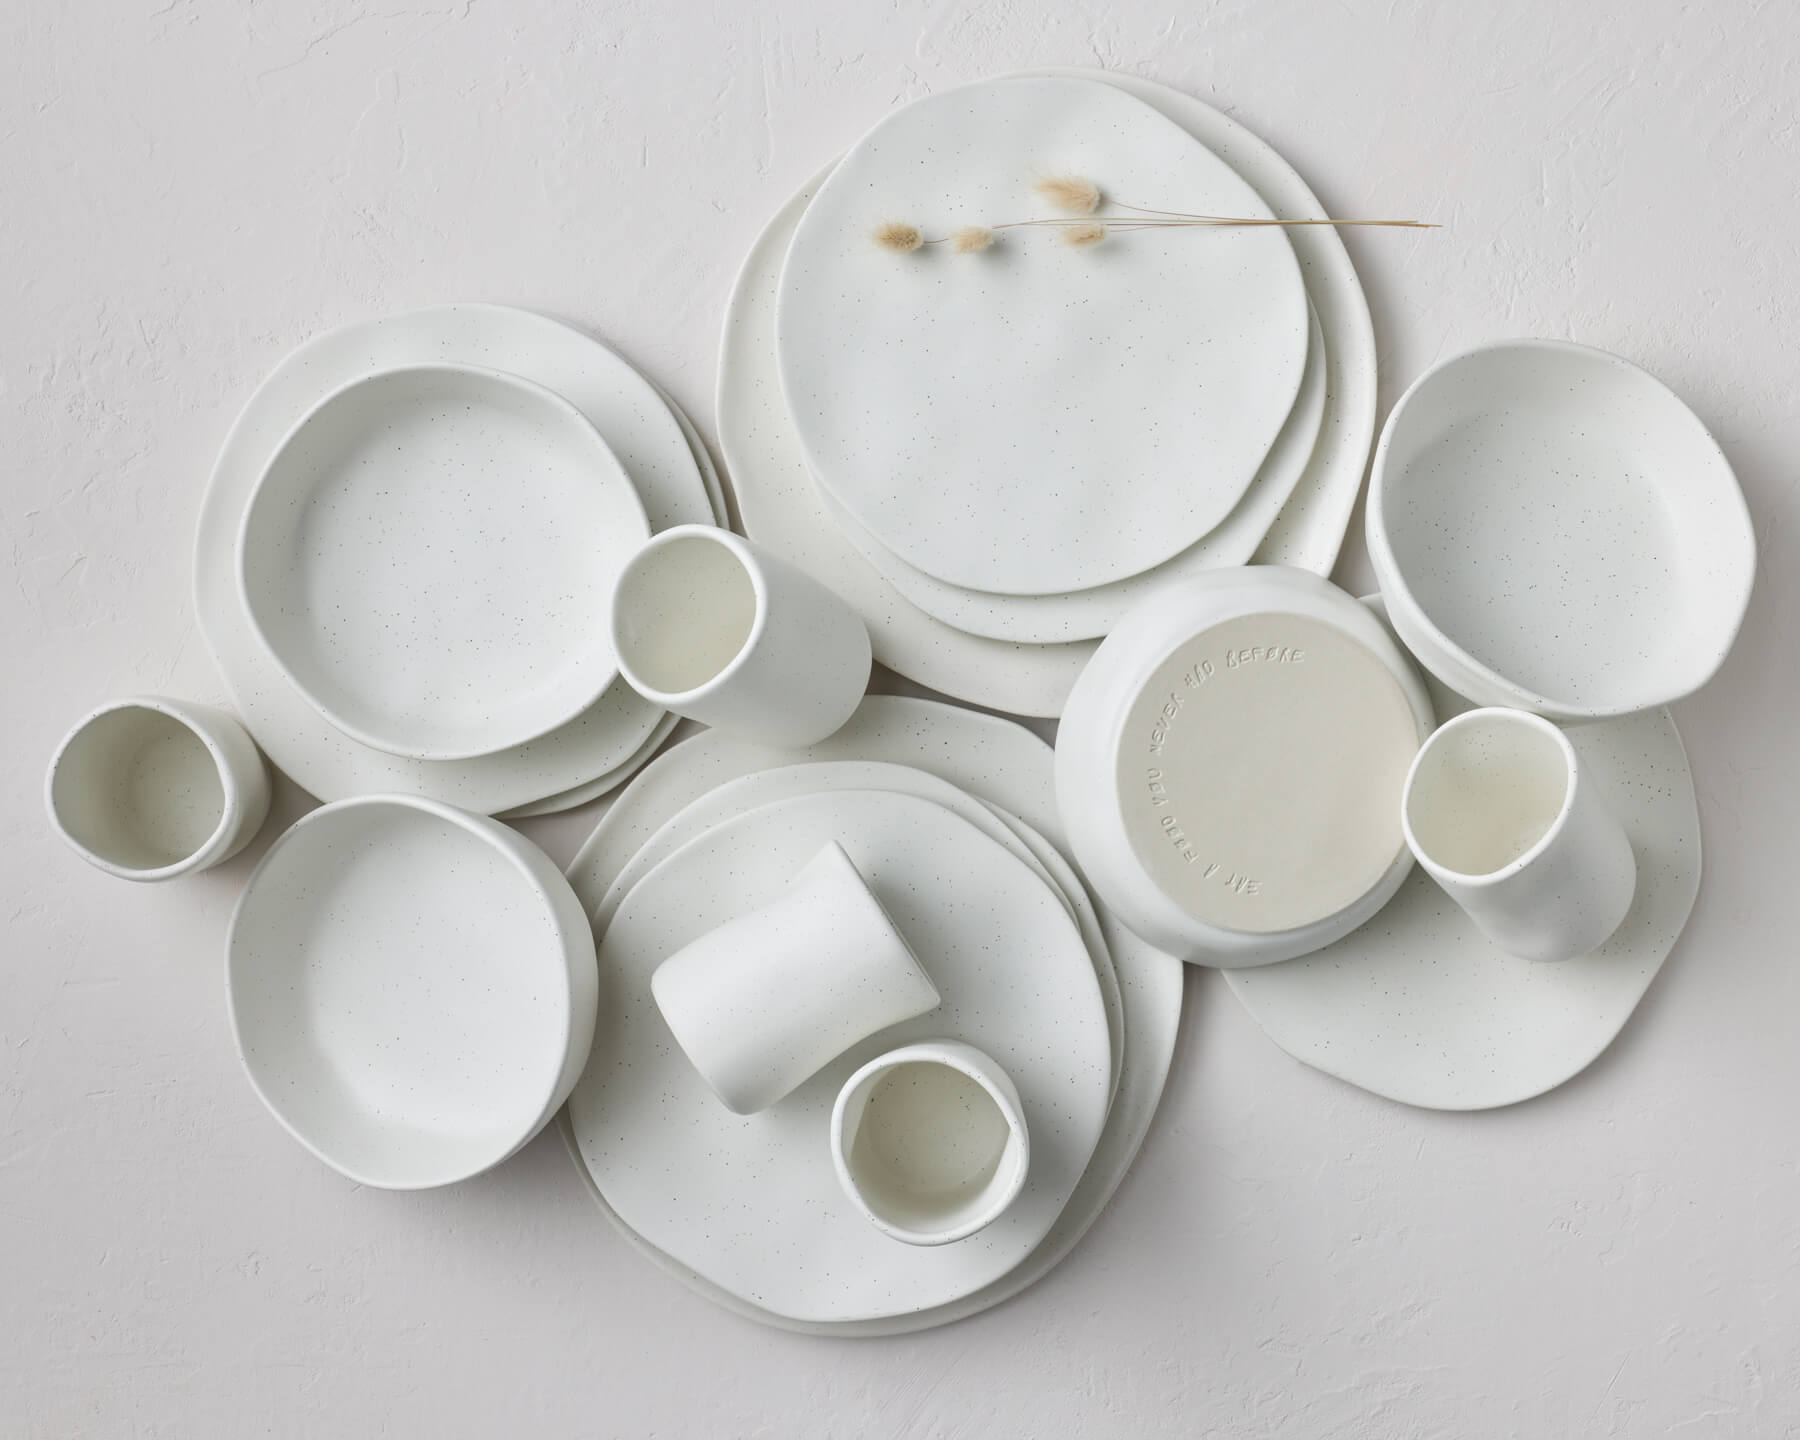 Stone + Lain: Elevate Your Hotel Dining Experience with the Stone by Mercer Project Dinnerware Collection